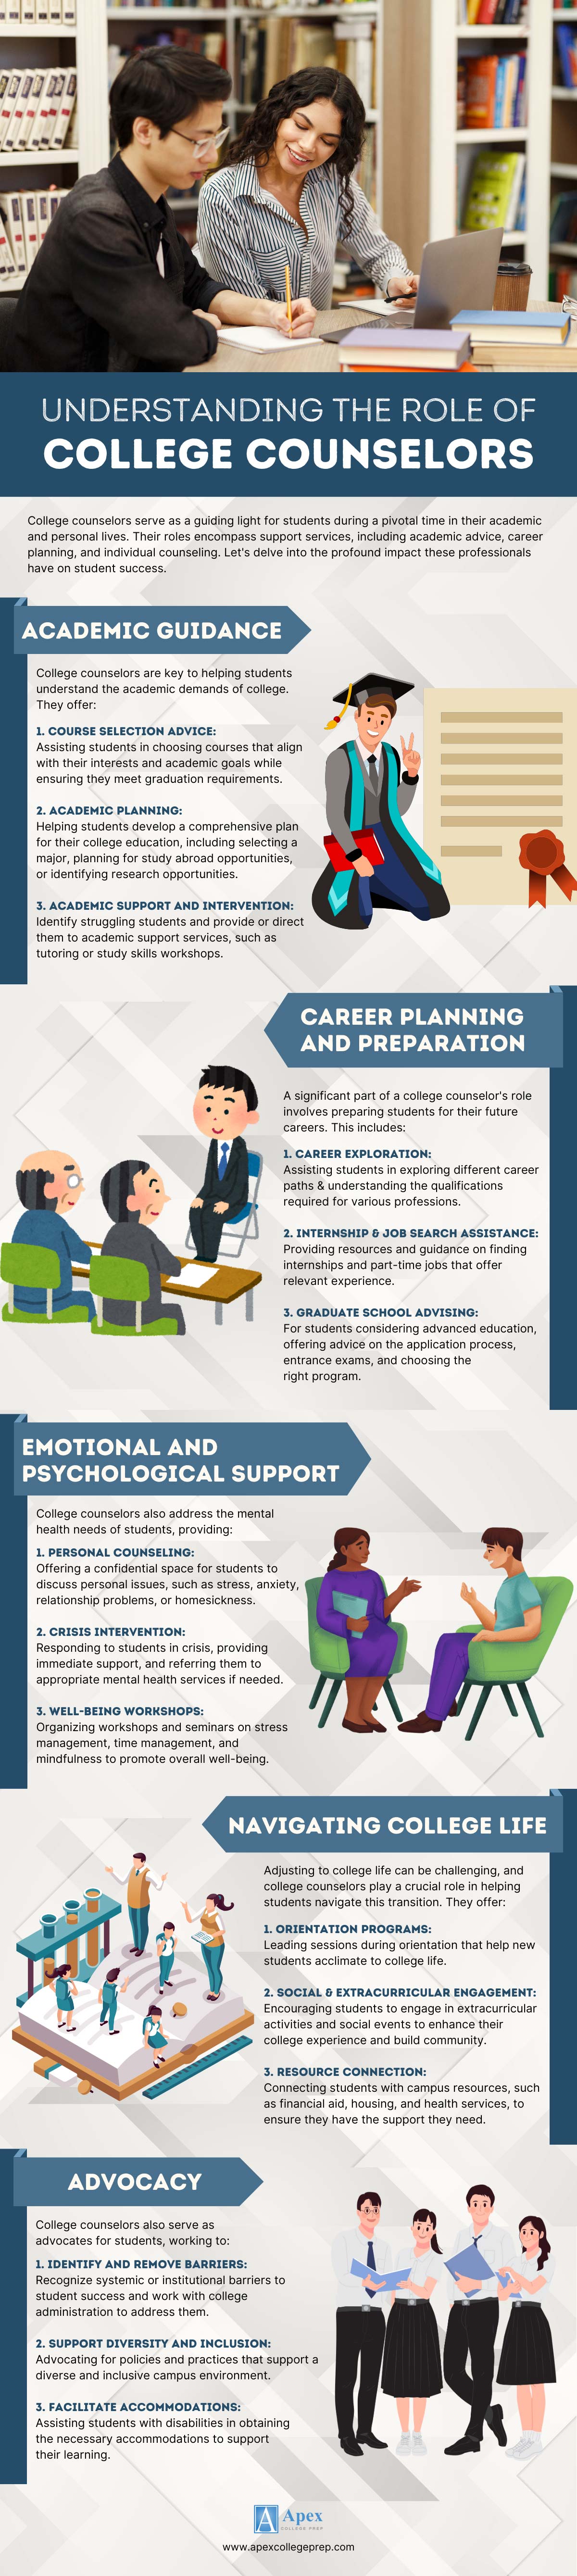 Understanding the Role of College Counselors